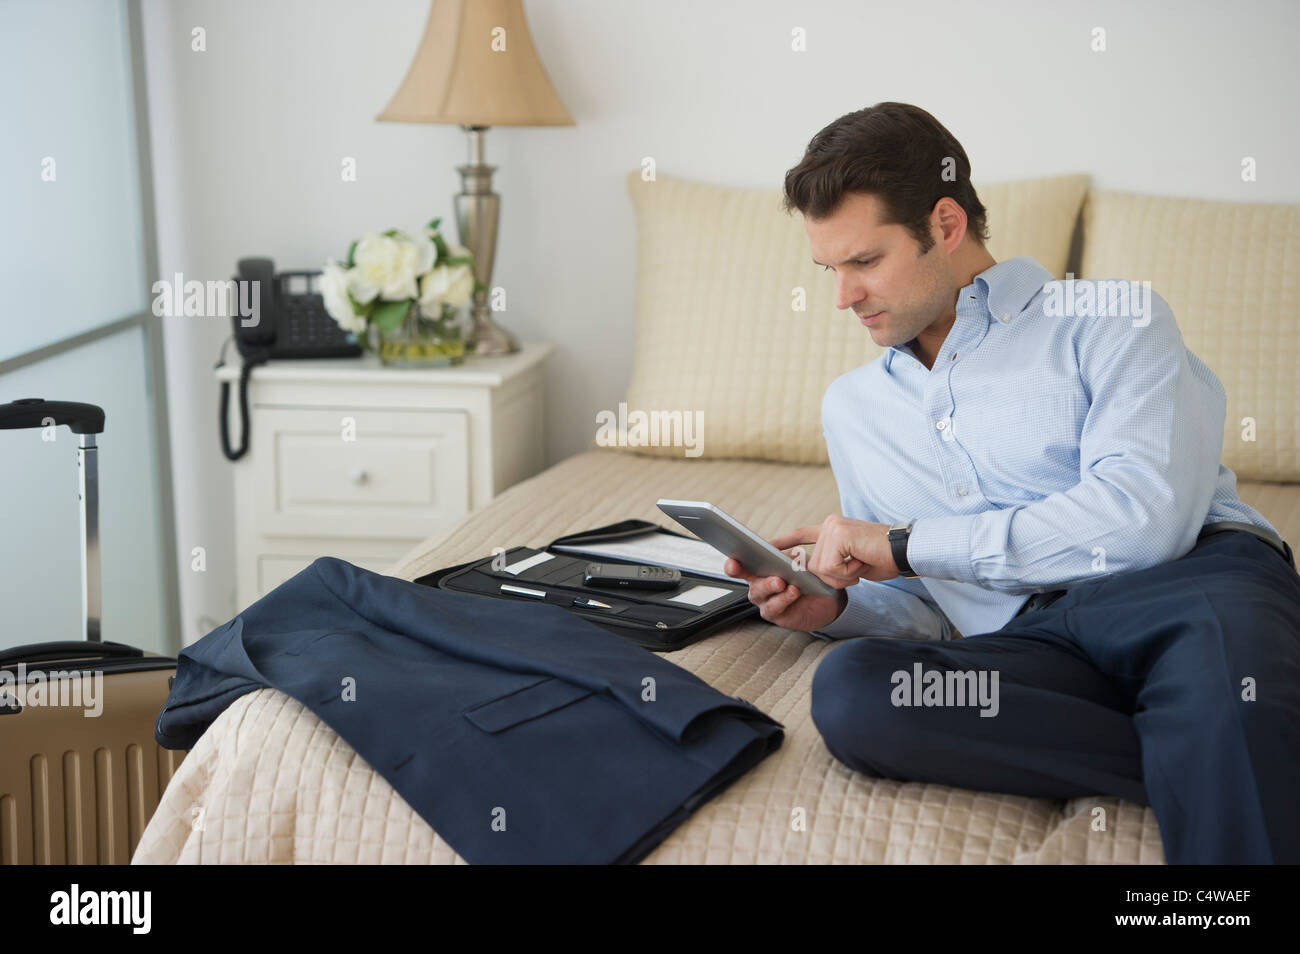 USA,New Jersey,Jersey City,businessman using digital tablet in hotel room Stock Photo